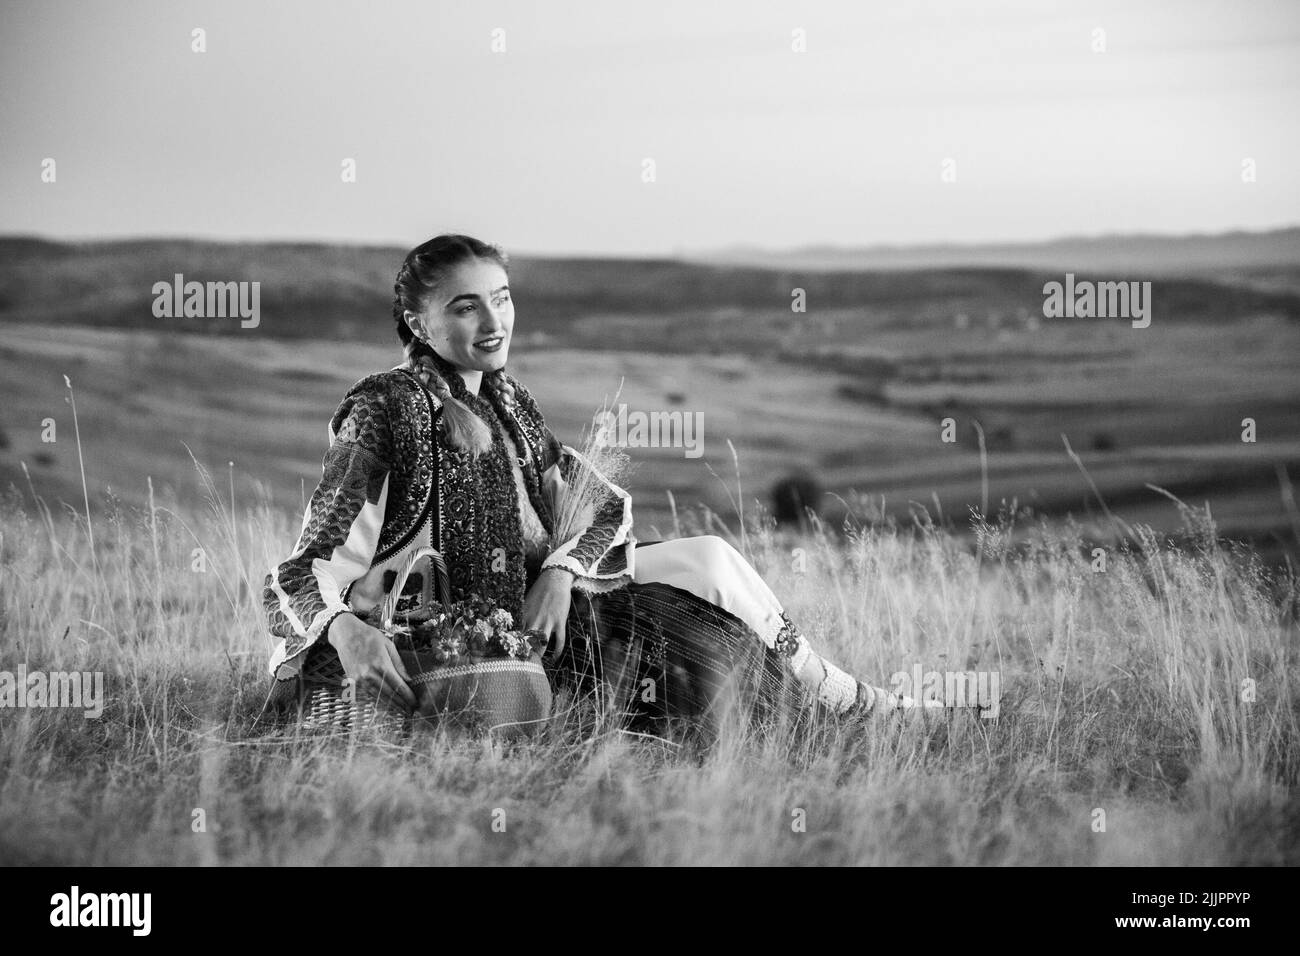 A young Romanian female in a traditional costume and basket posing in the field Stock Photo